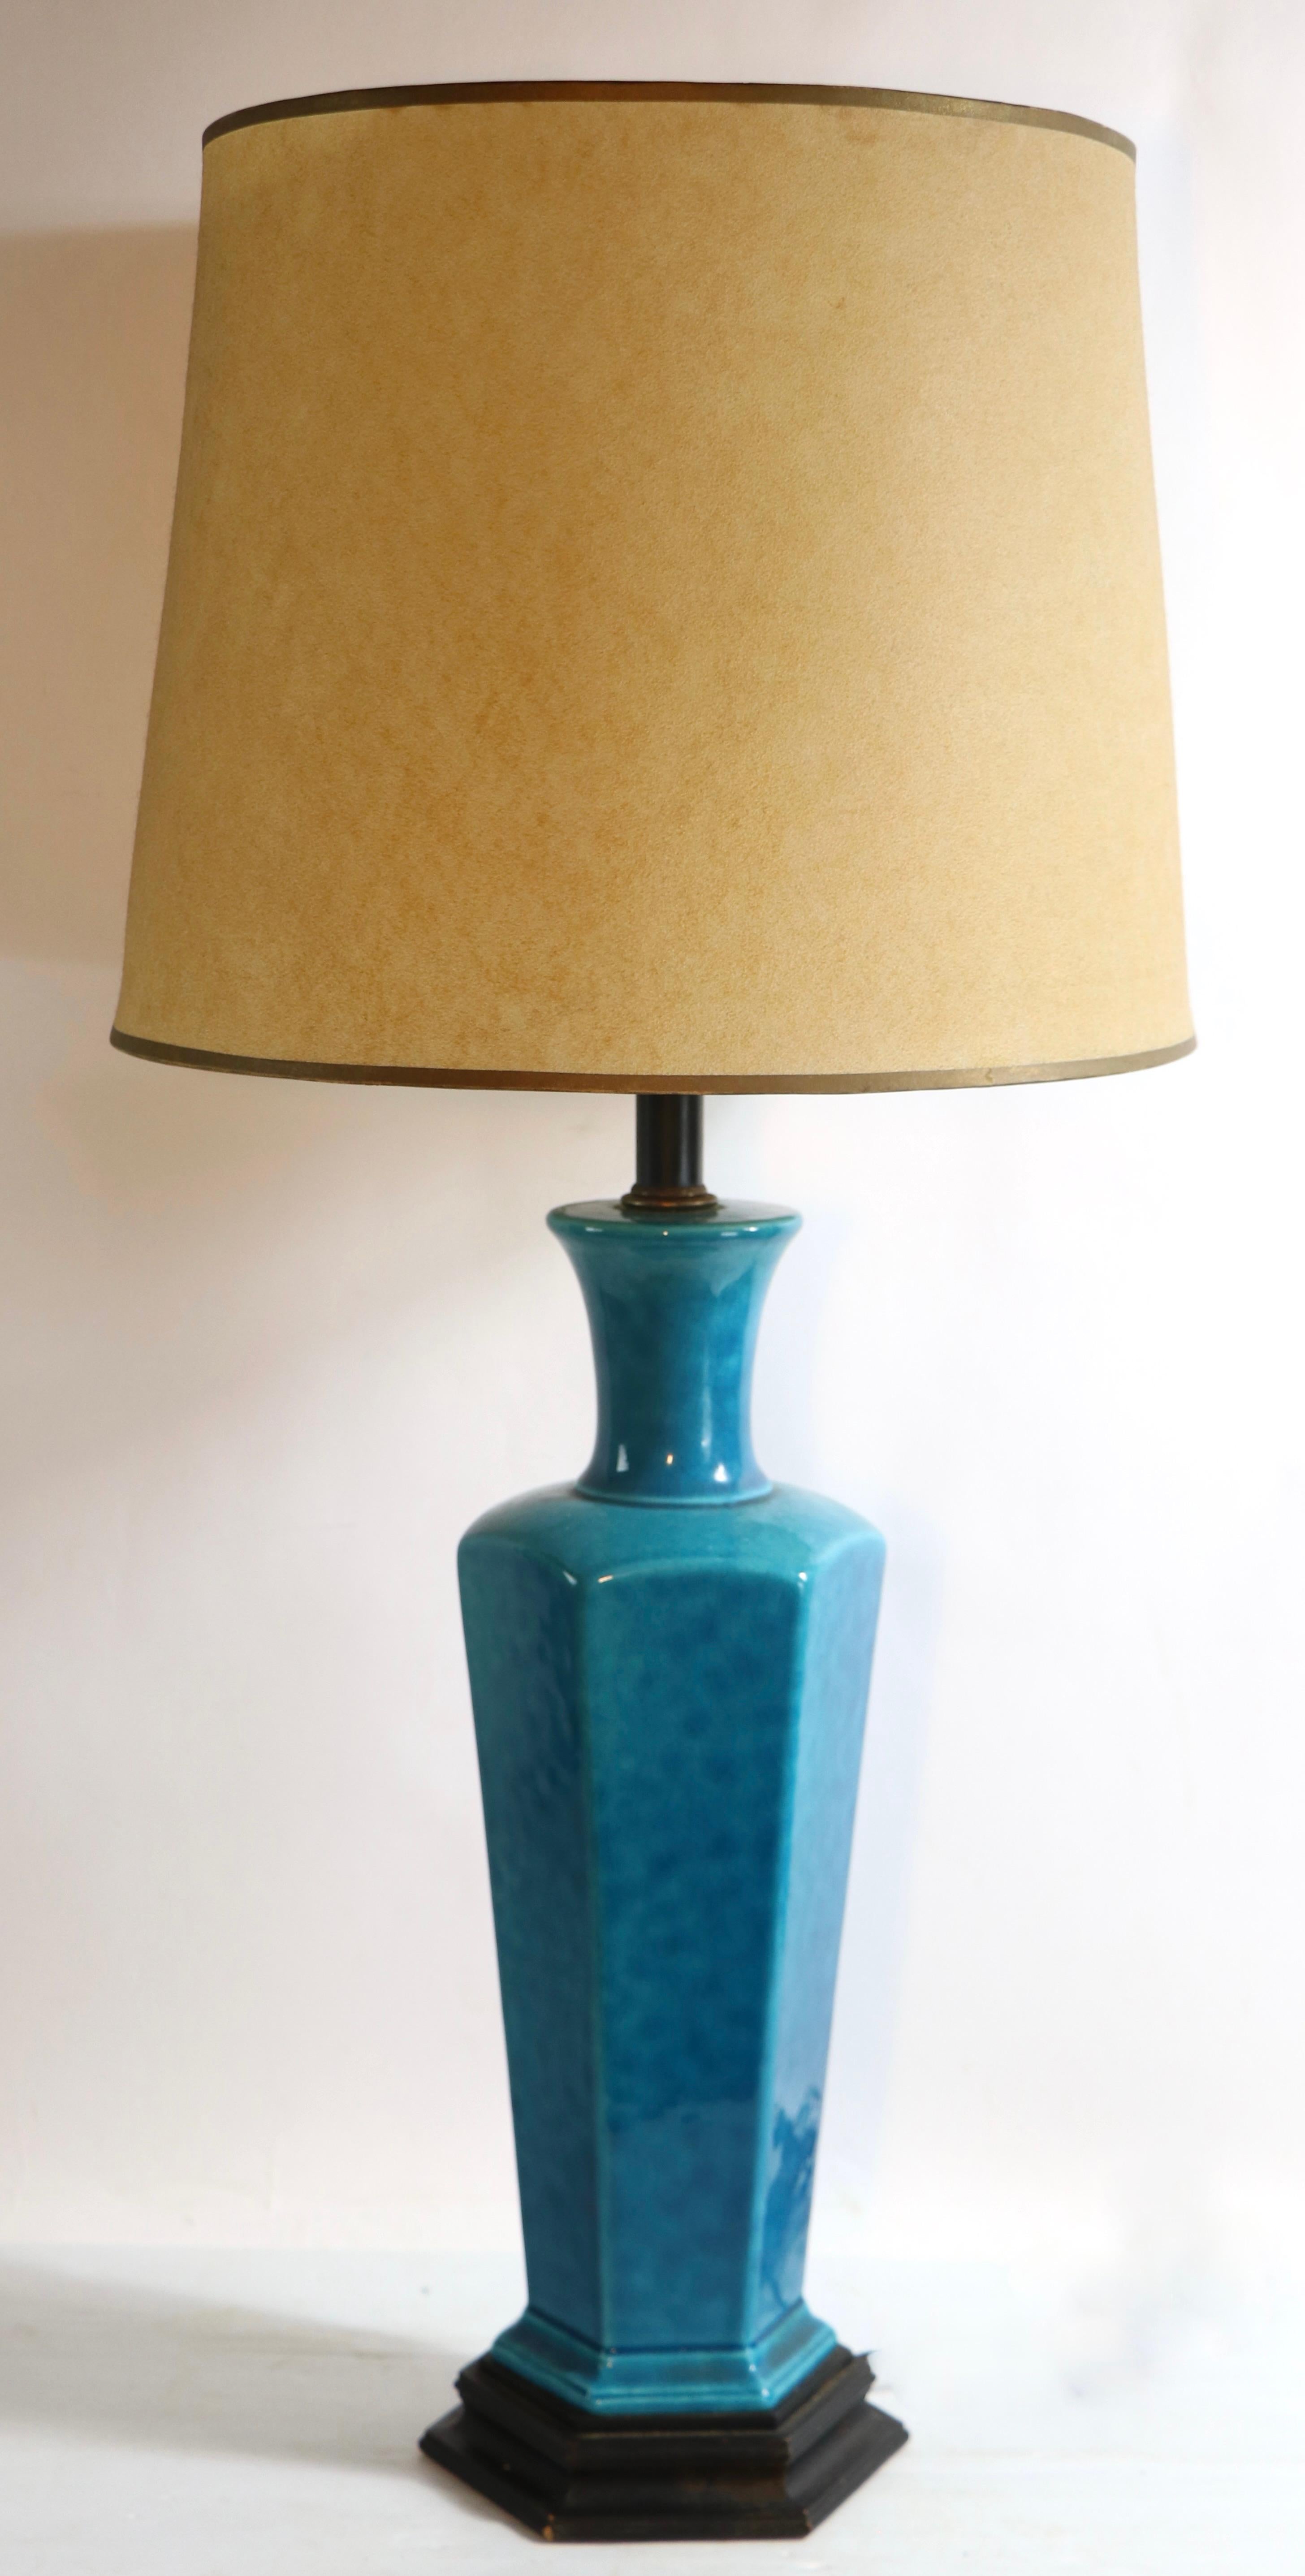 Asia Modern Chinese Style Table Lamp in Blue Craquelure Glaze Finish 2